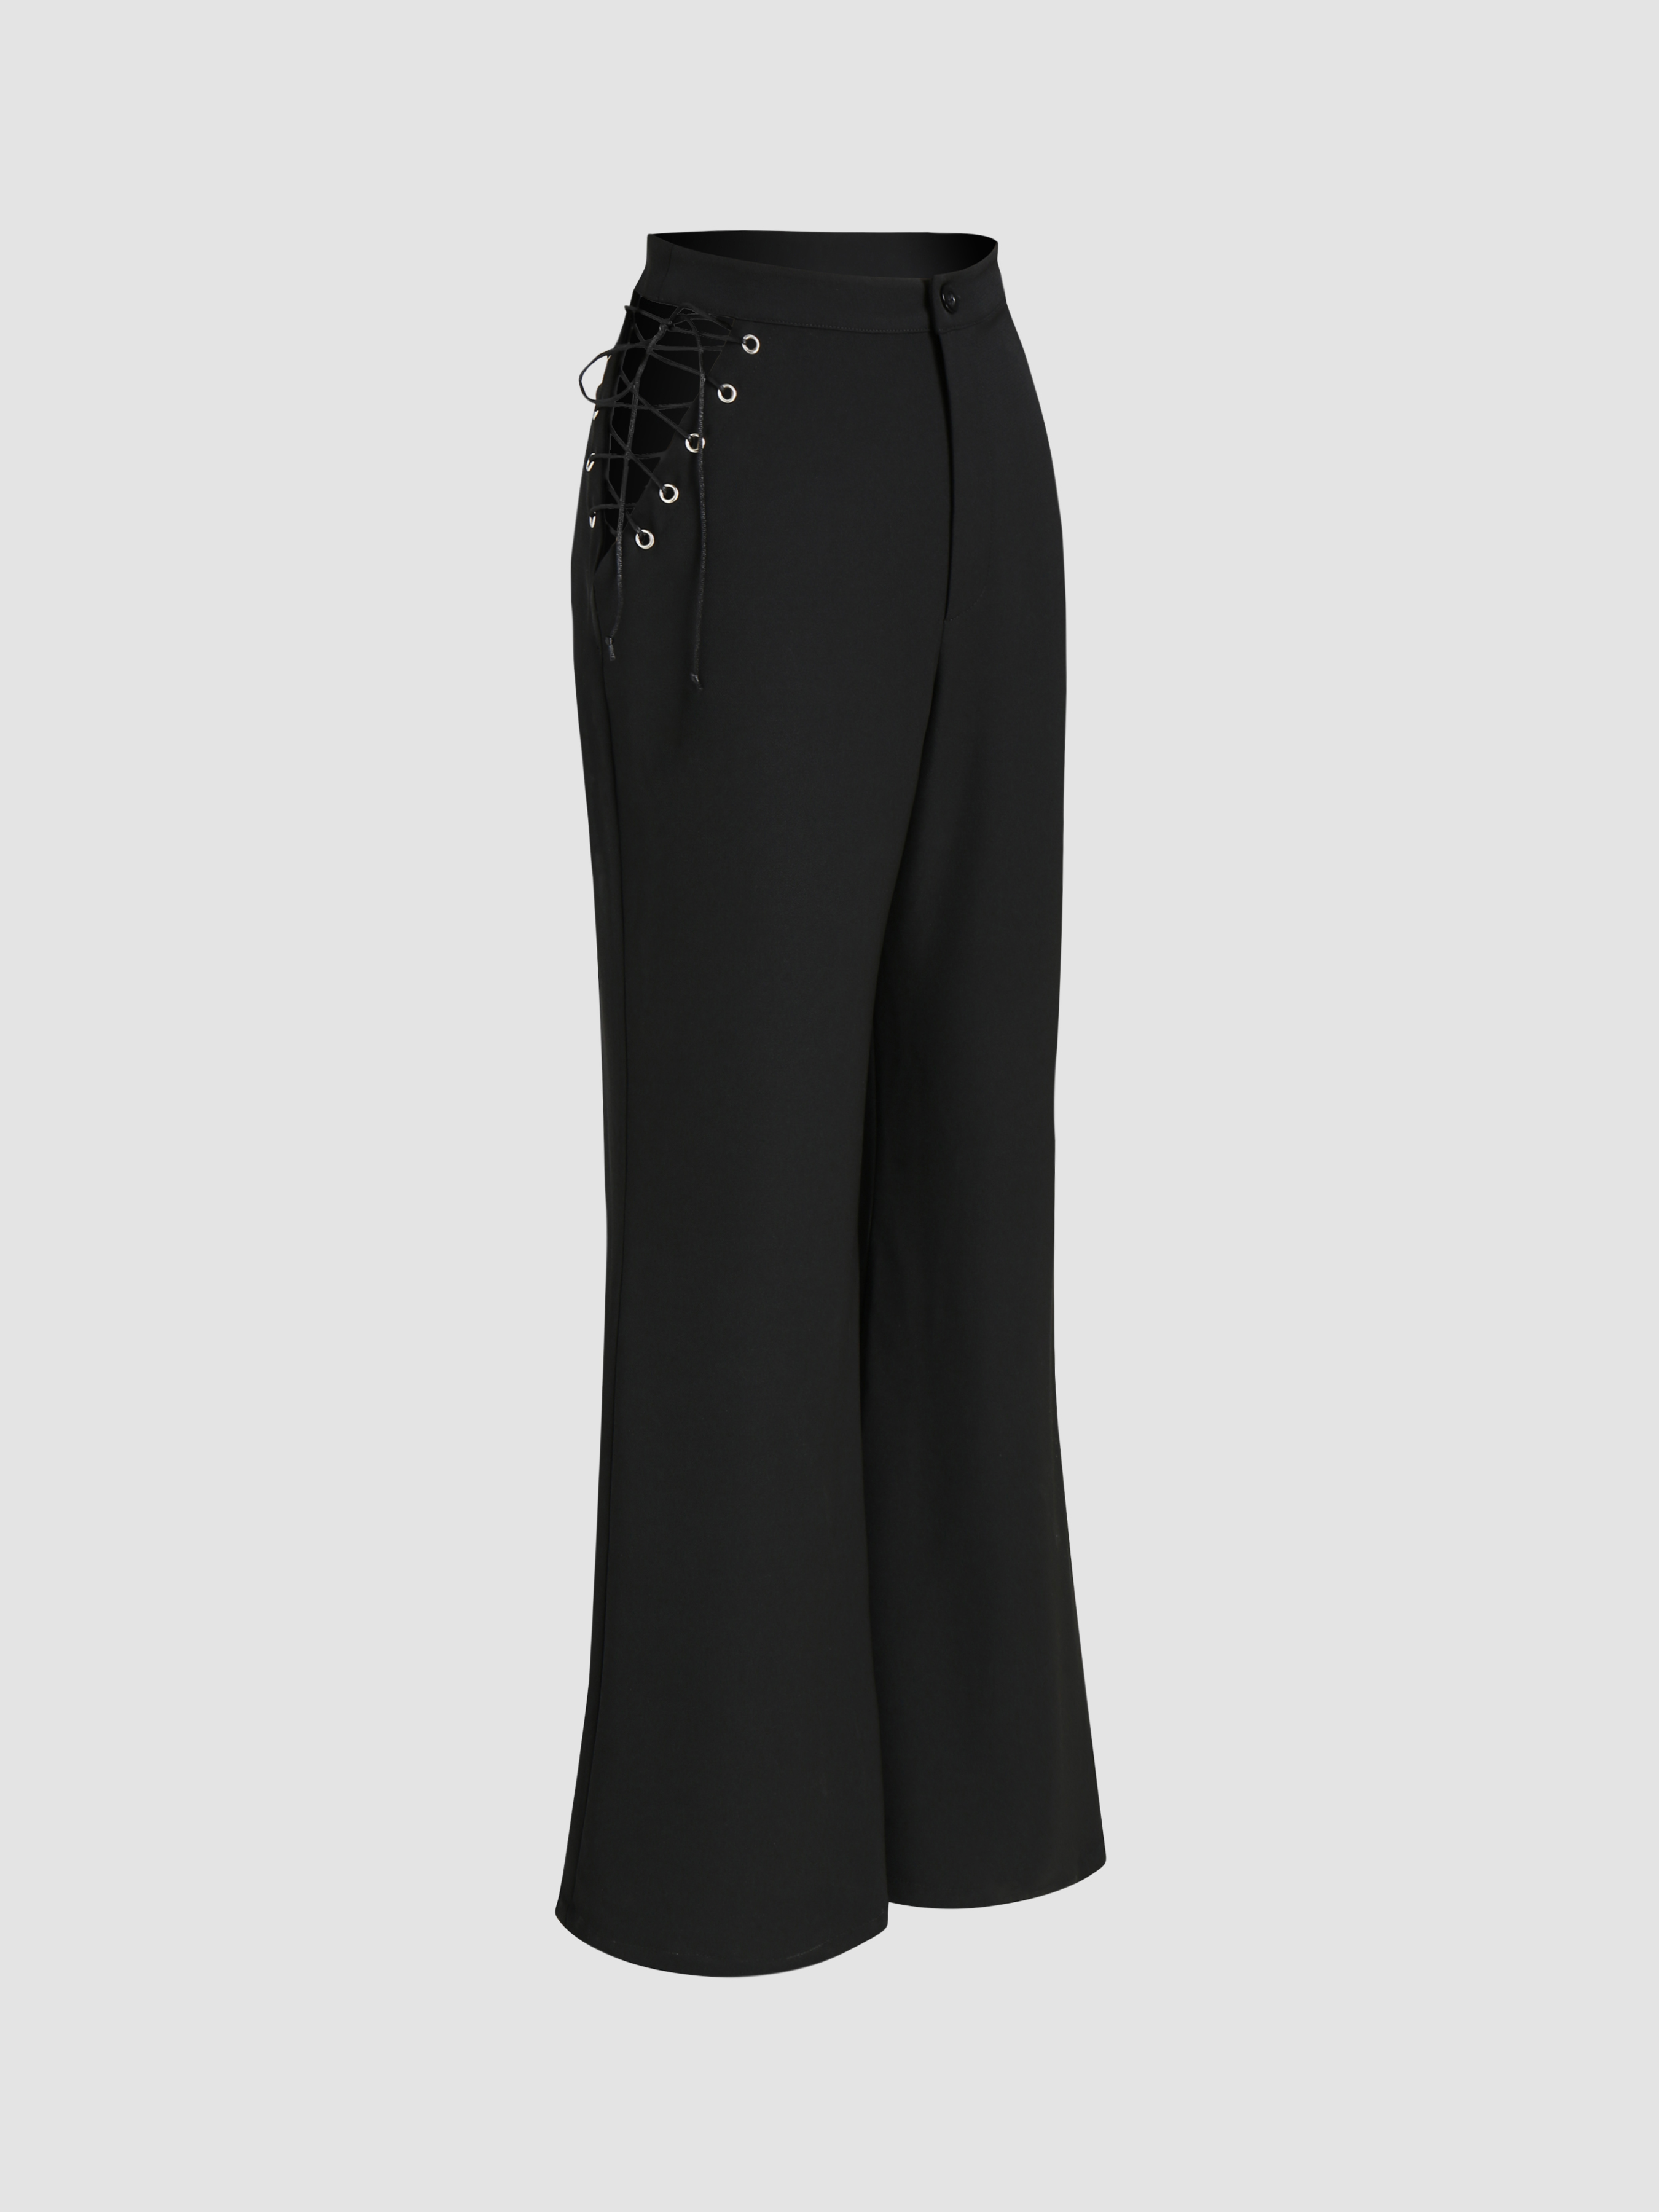 View All - Clothing | Fashion pants, Clothes for women, Fashion outfits